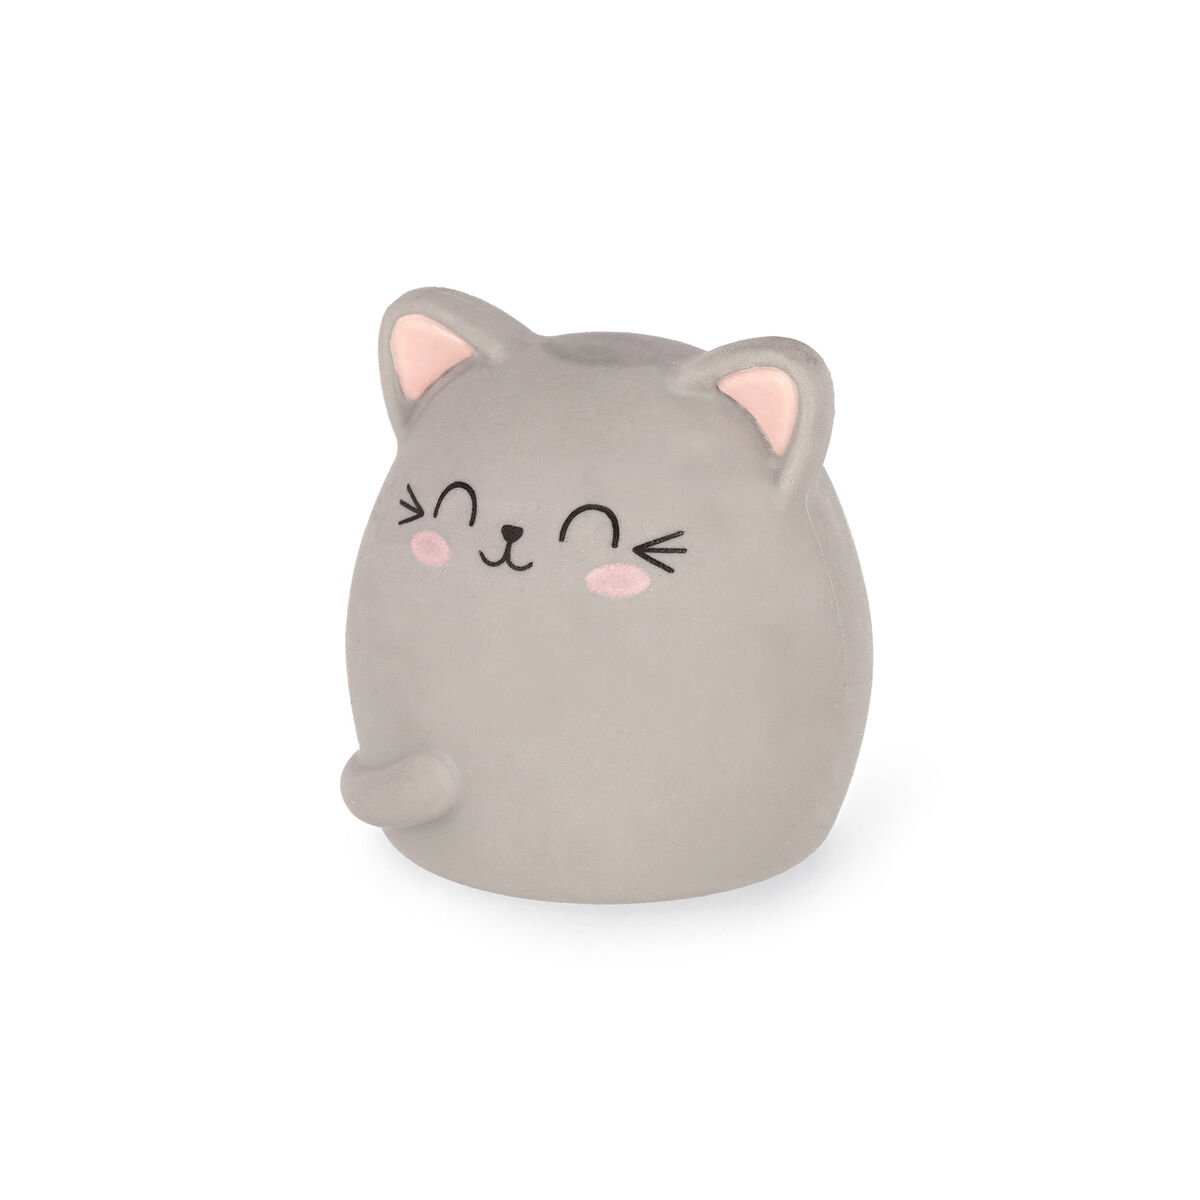 Scented Eraser - Meow, , zoo